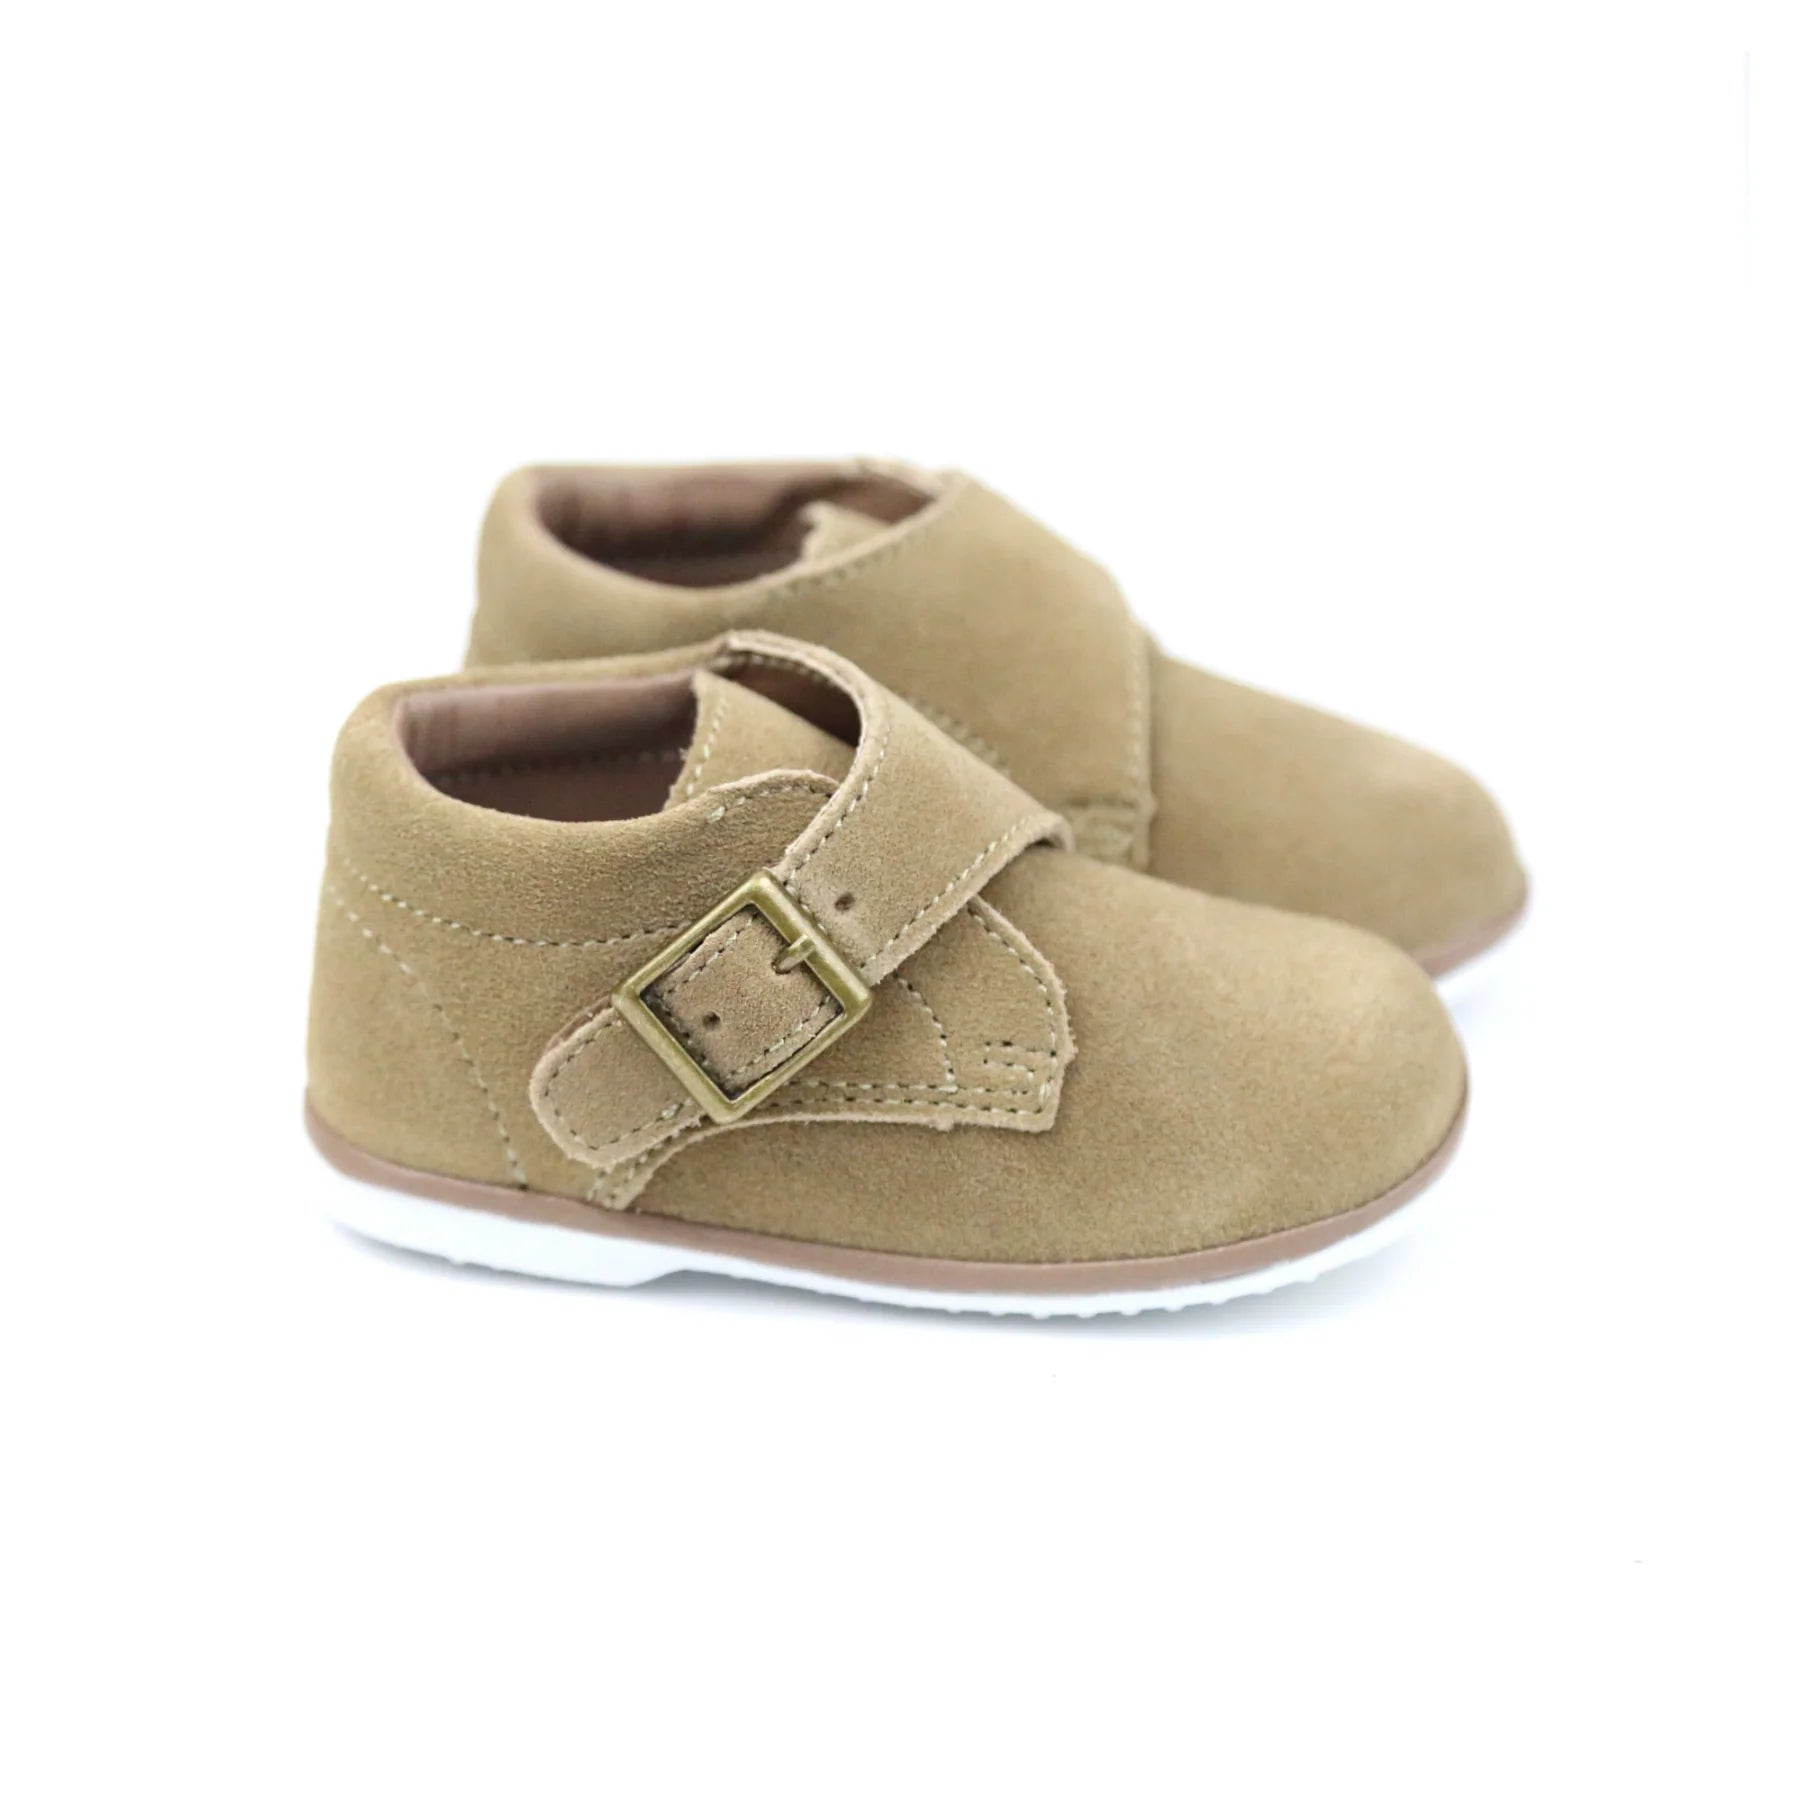 FINCH BABY BOYS LEATHER BUCKLE BOOT